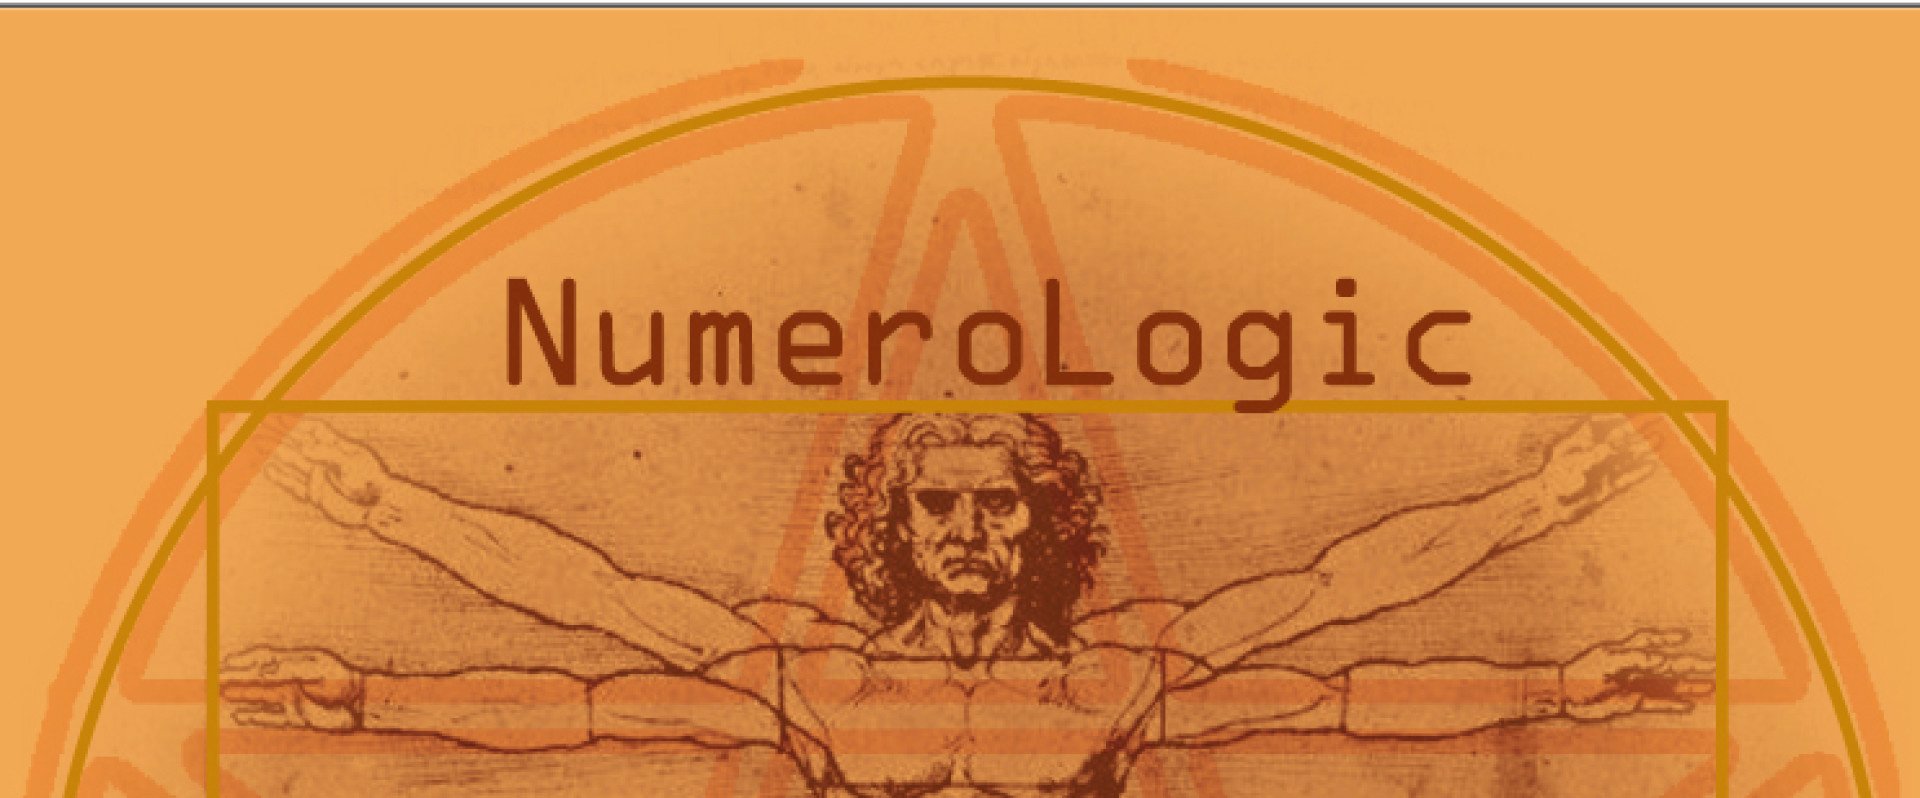 Numerological day analysis 23–5-2020 14/5 Charity/ Expansion